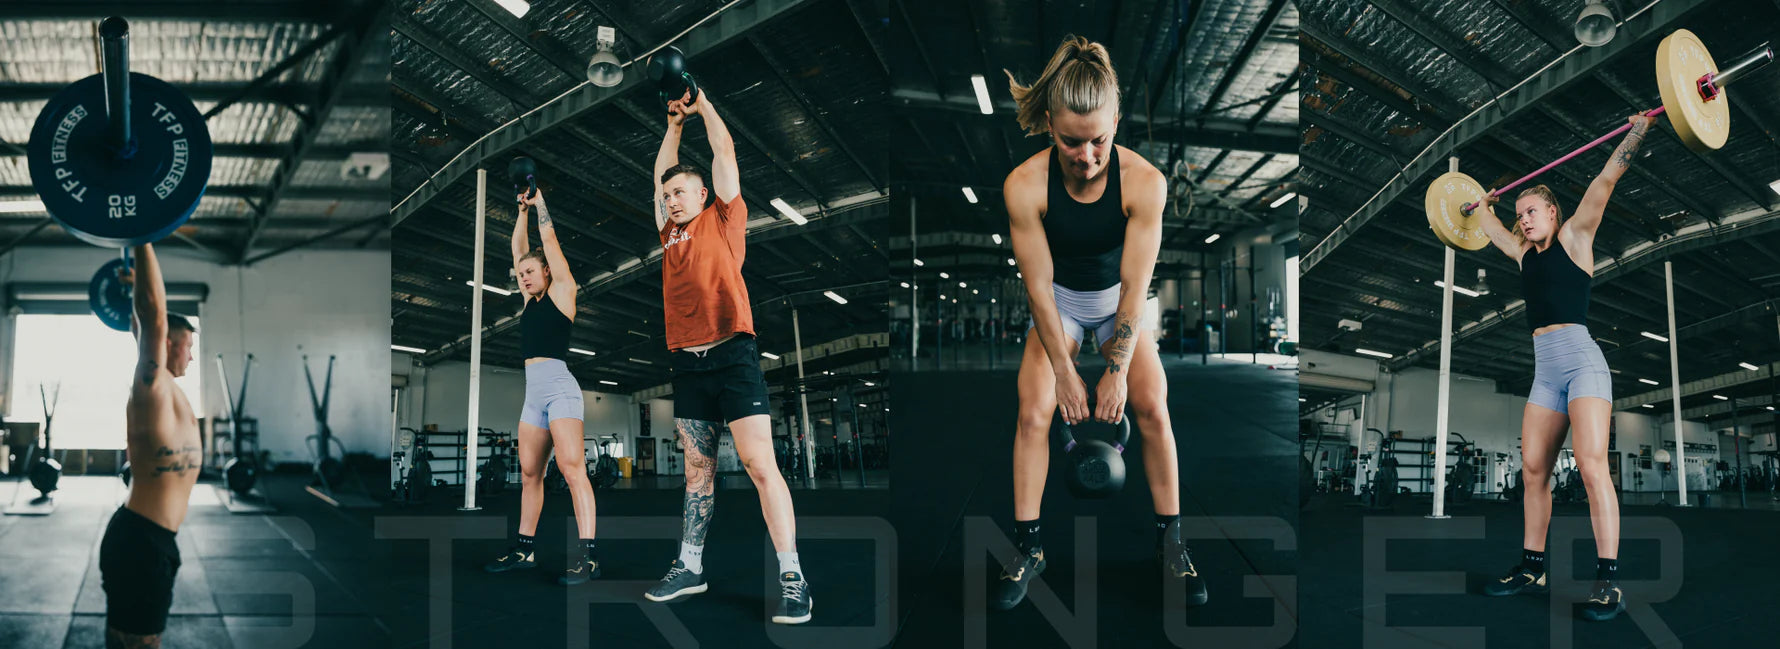 TFP Fitness Stronger banner with athletes using gym equipment